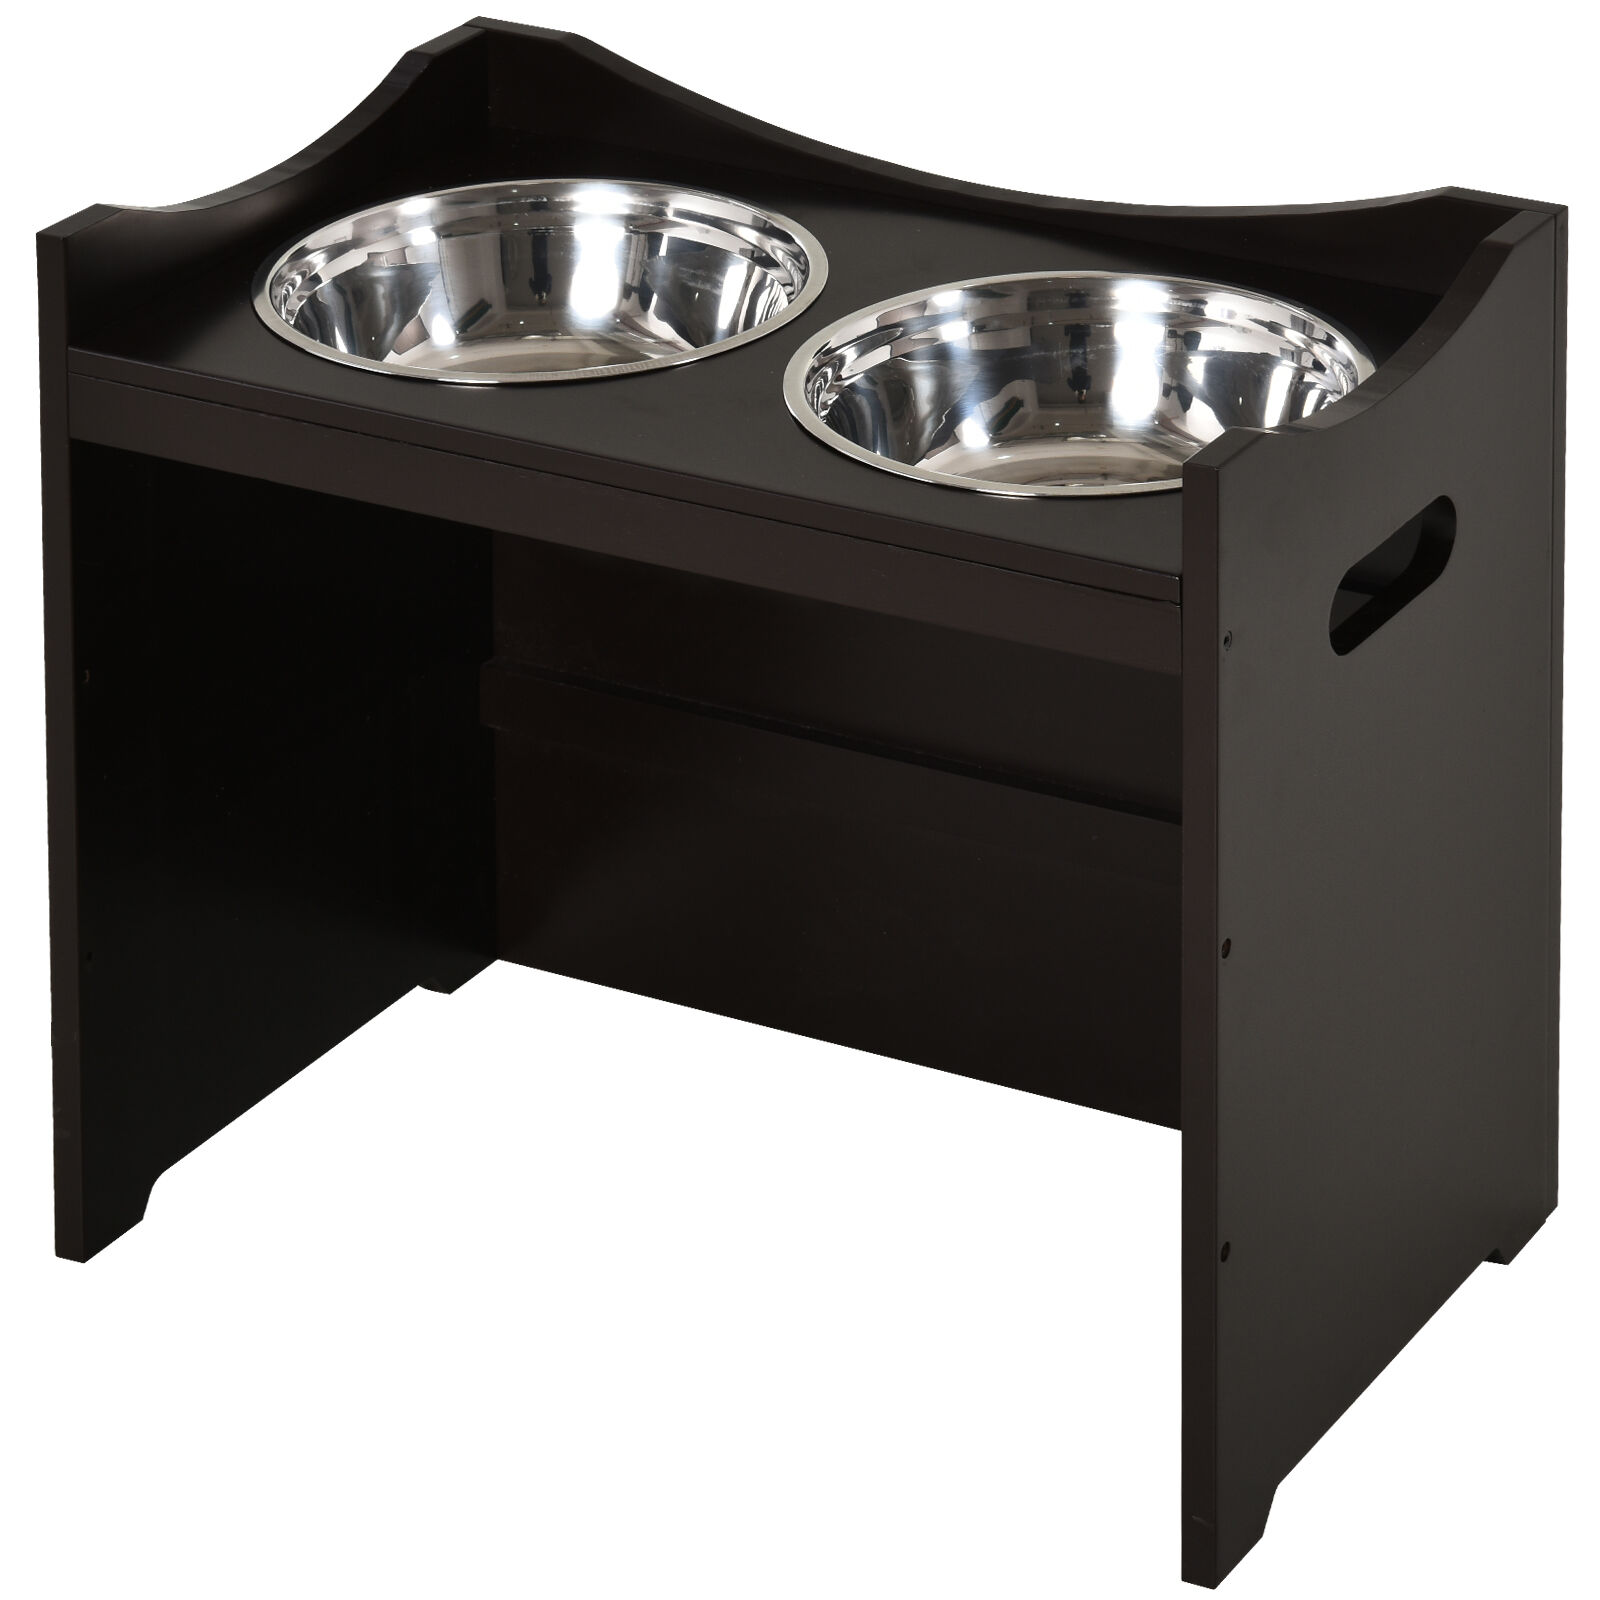 PawHut Elevated Dog Bowl Feedeing Station with 2 Stainless Steel Bowls, 3 Levels Adjustable Height Levels  and Wood Finish